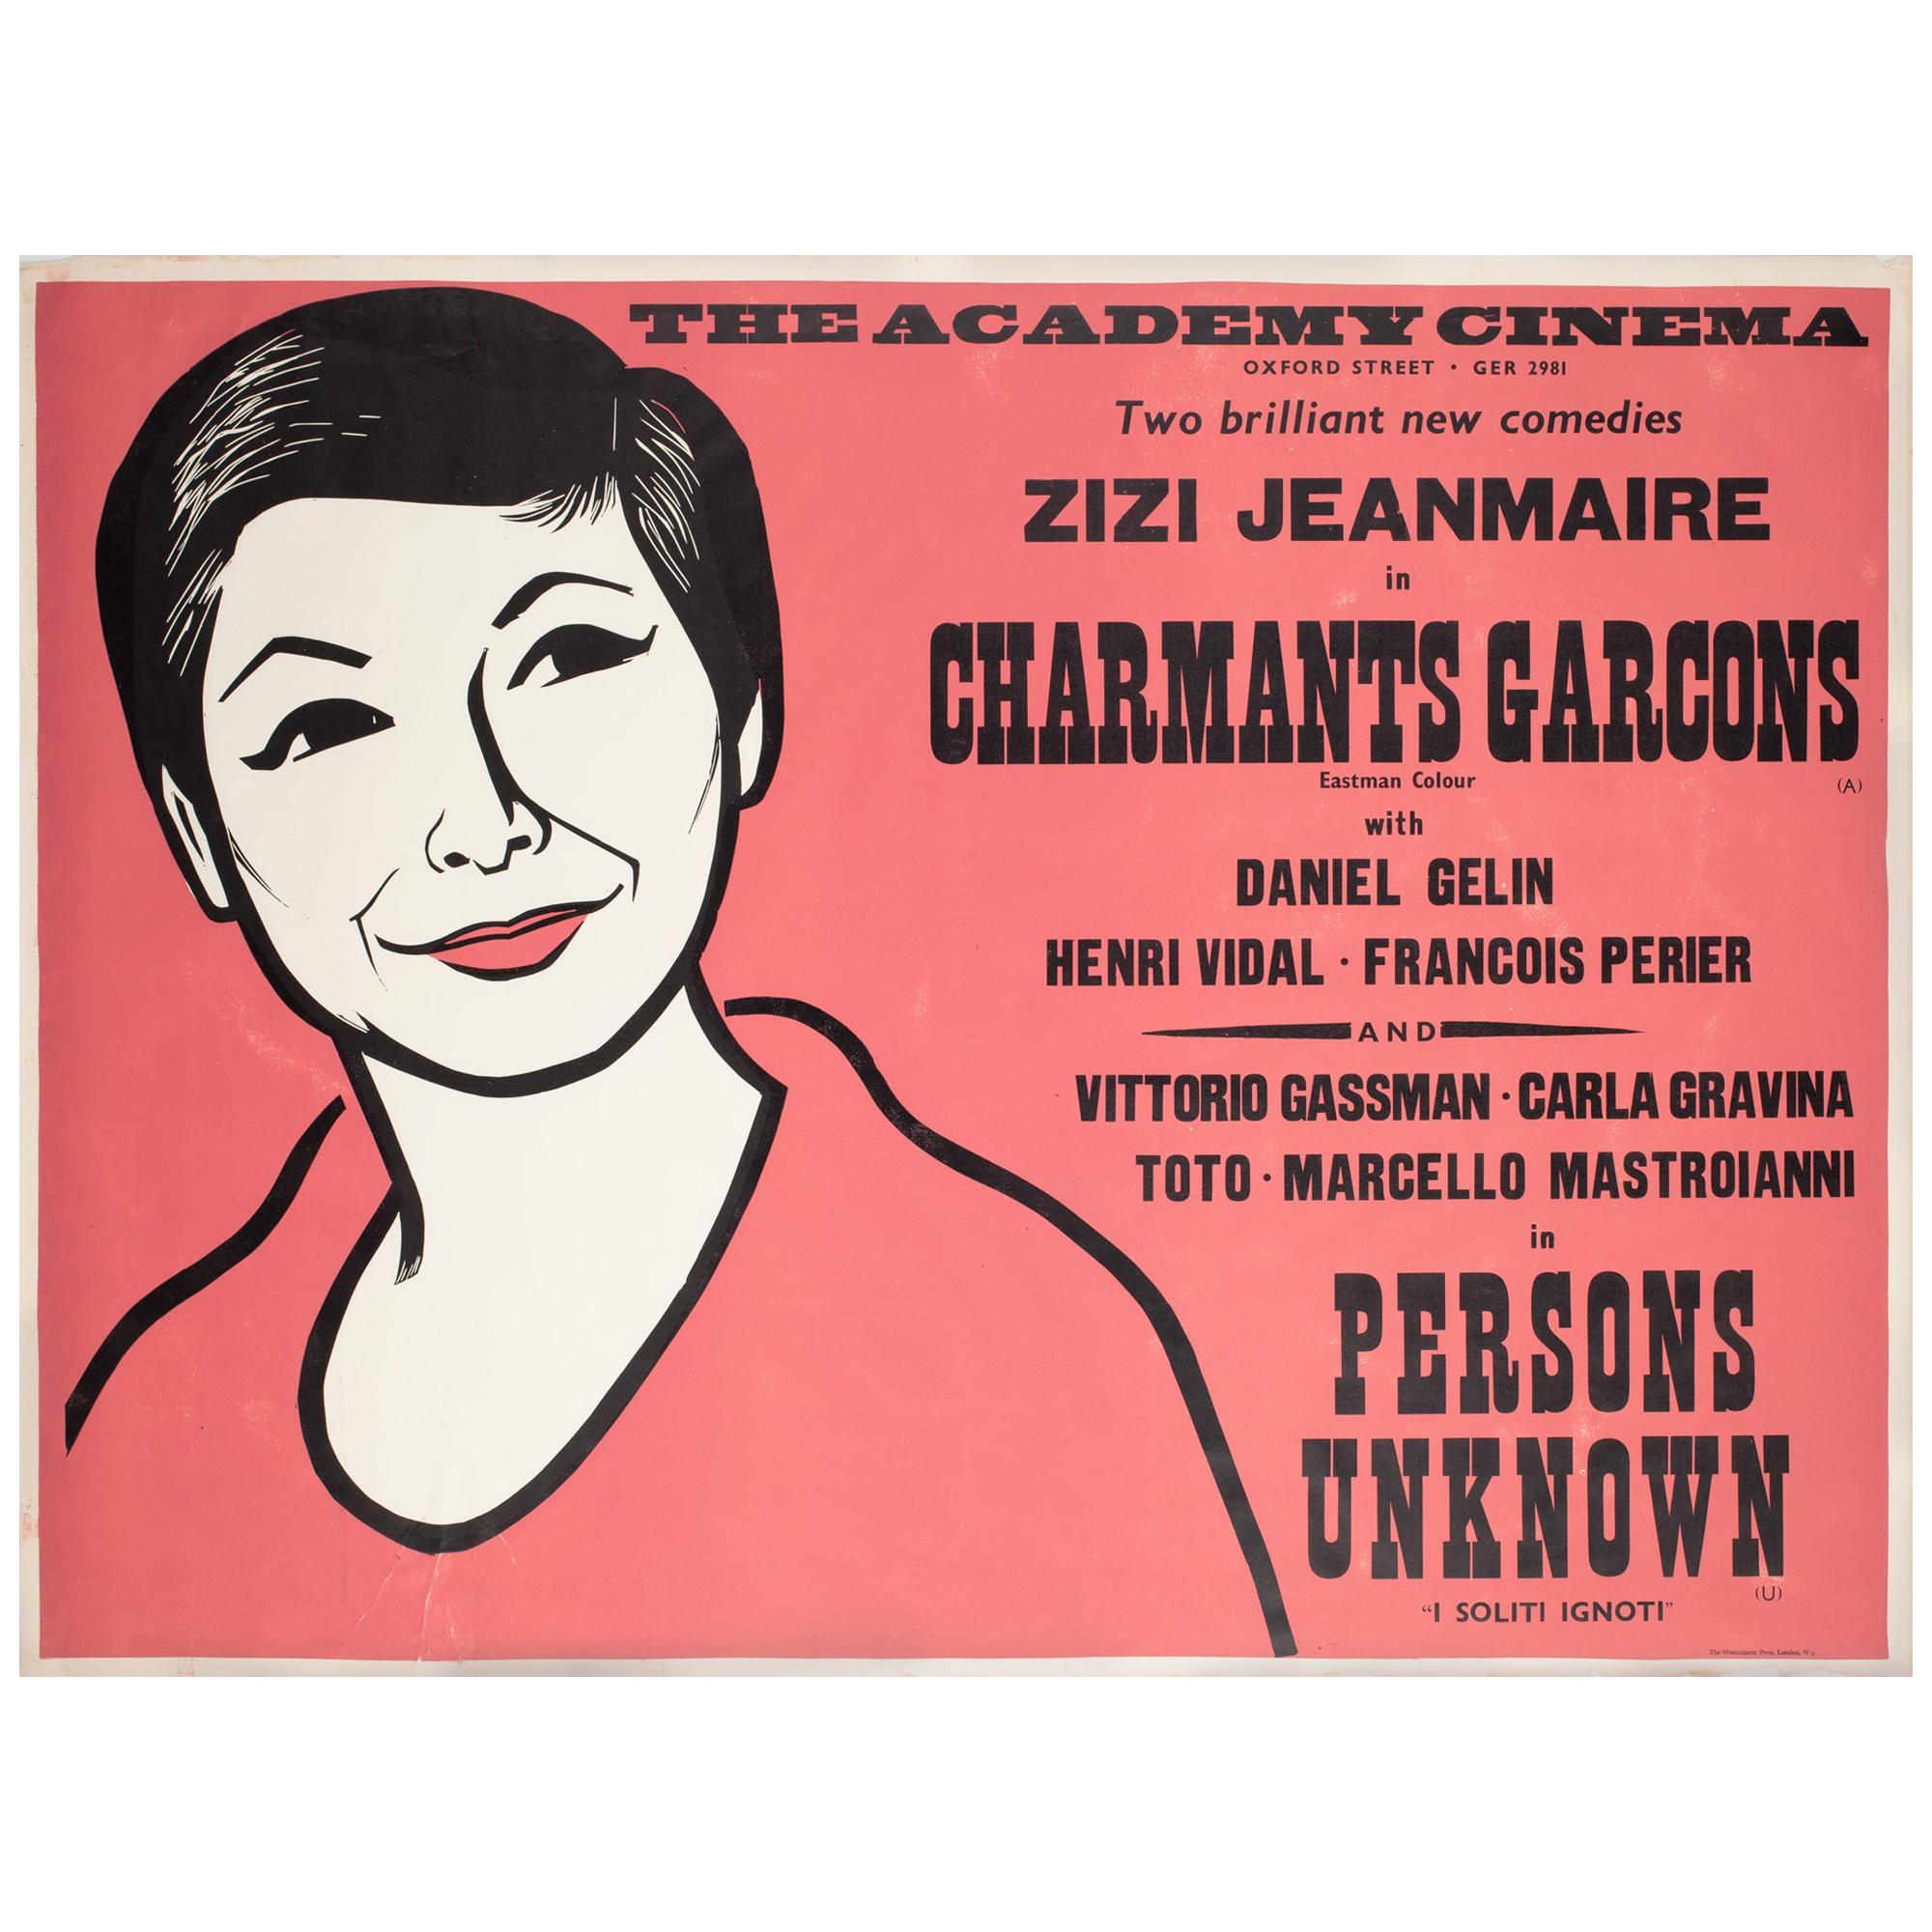 Charmants Garcons/Persons Unknown 1959 Academy Cinema Film Poster, Strausfeld For Sale